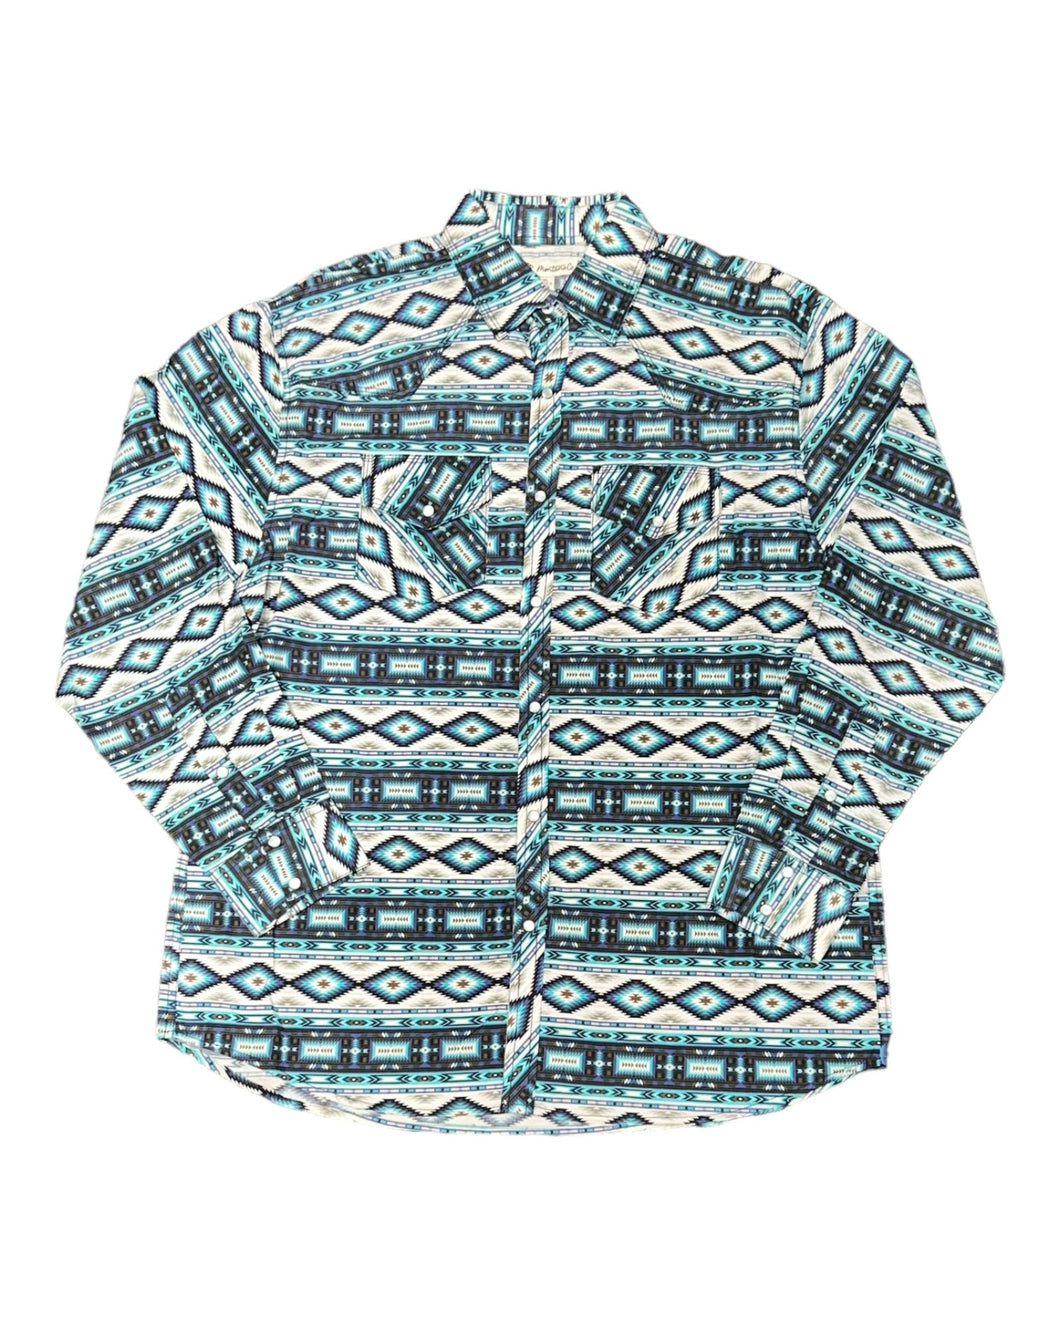 MontanaCo Men's Long Sleeved All Over Aztec in Blue Print Western Snap Shirt M-1105